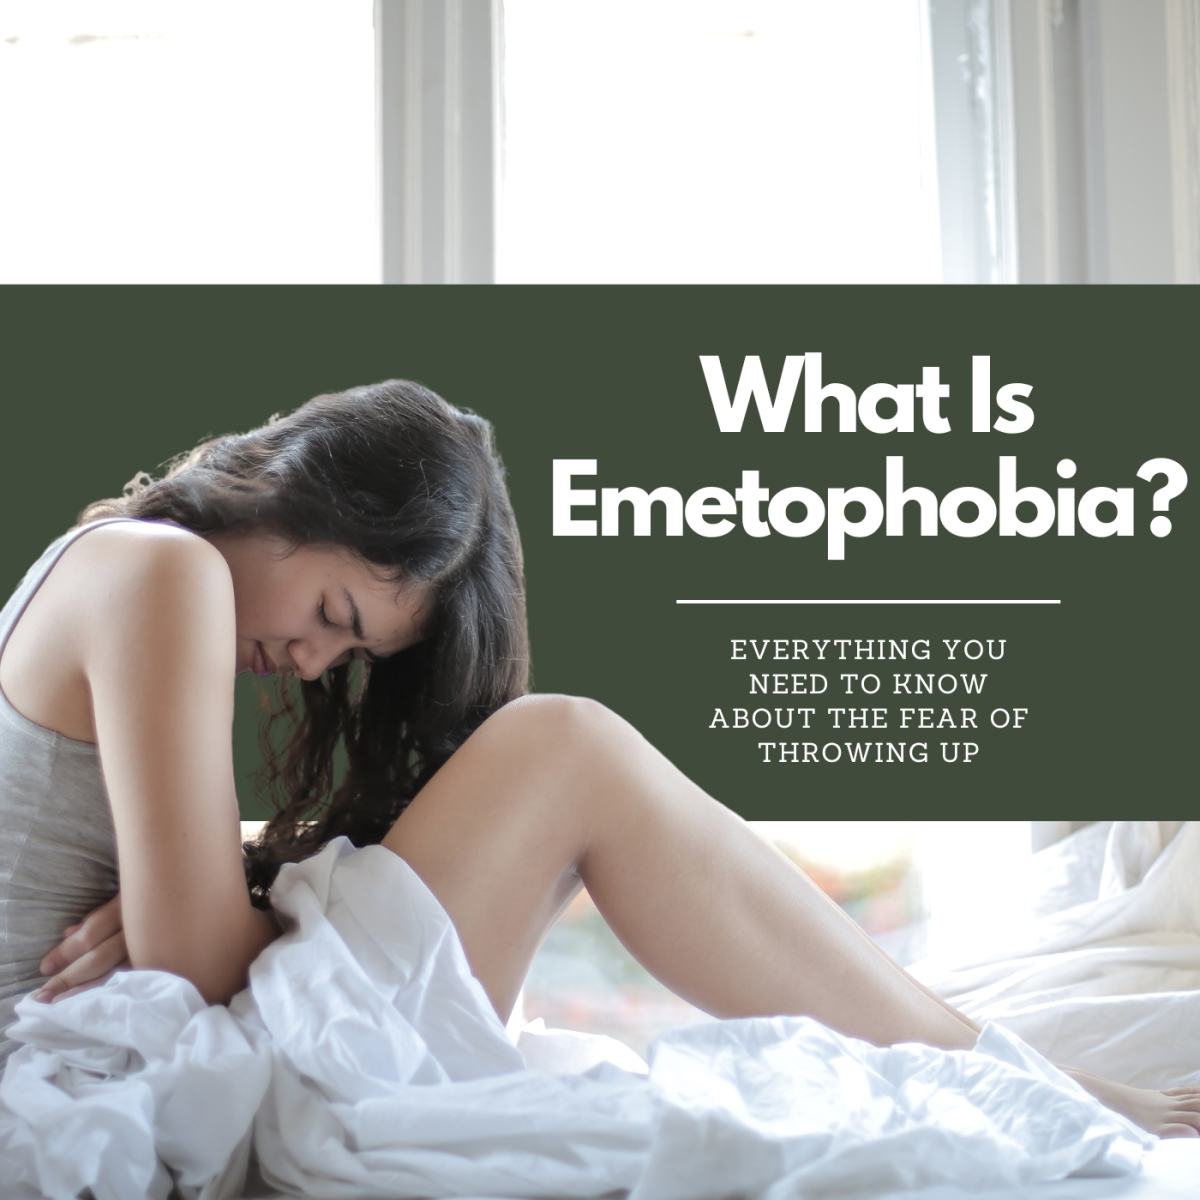 What Is Emetophobia? A Guide to the Fear of Throwing Up